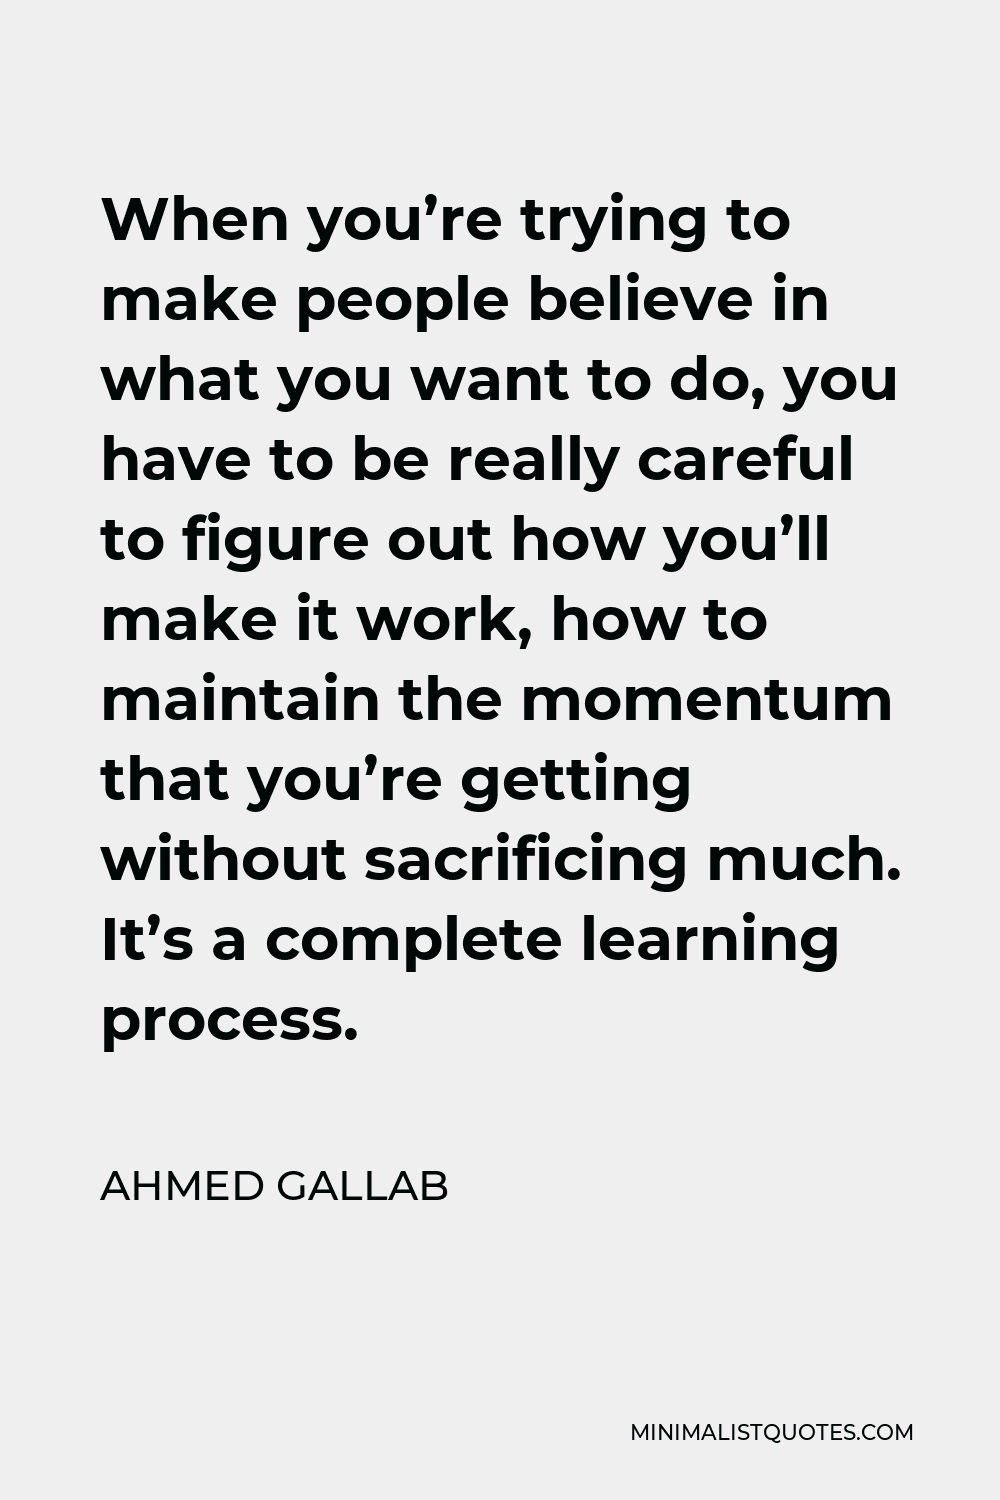 Ahmed Gallab Quote - When you’re trying to make people believe in what you want to do, you have to be really careful to figure out how you’ll make it work, how to maintain the momentum that you’re getting without sacrificing much. It’s a complete learning process.